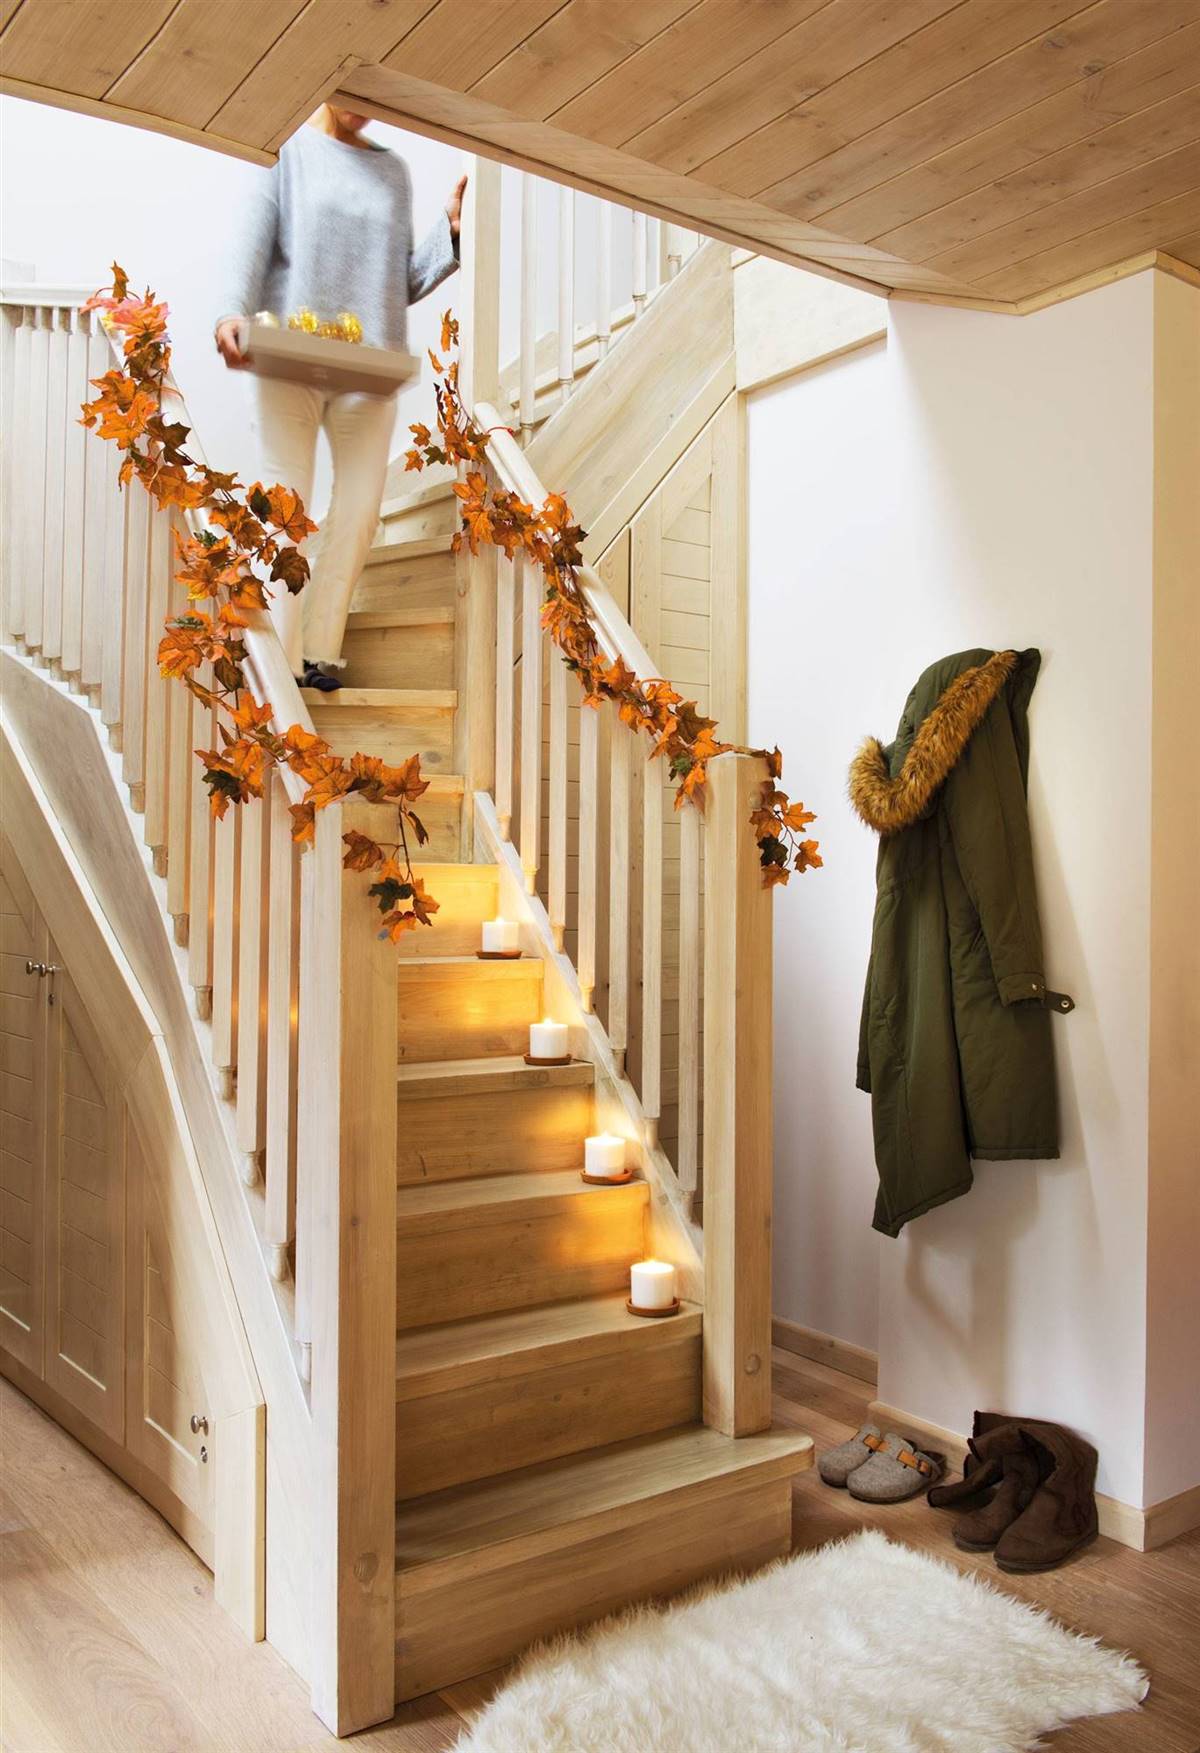 THE MOST AUTUMNAL CHRISTMAS GARLAND